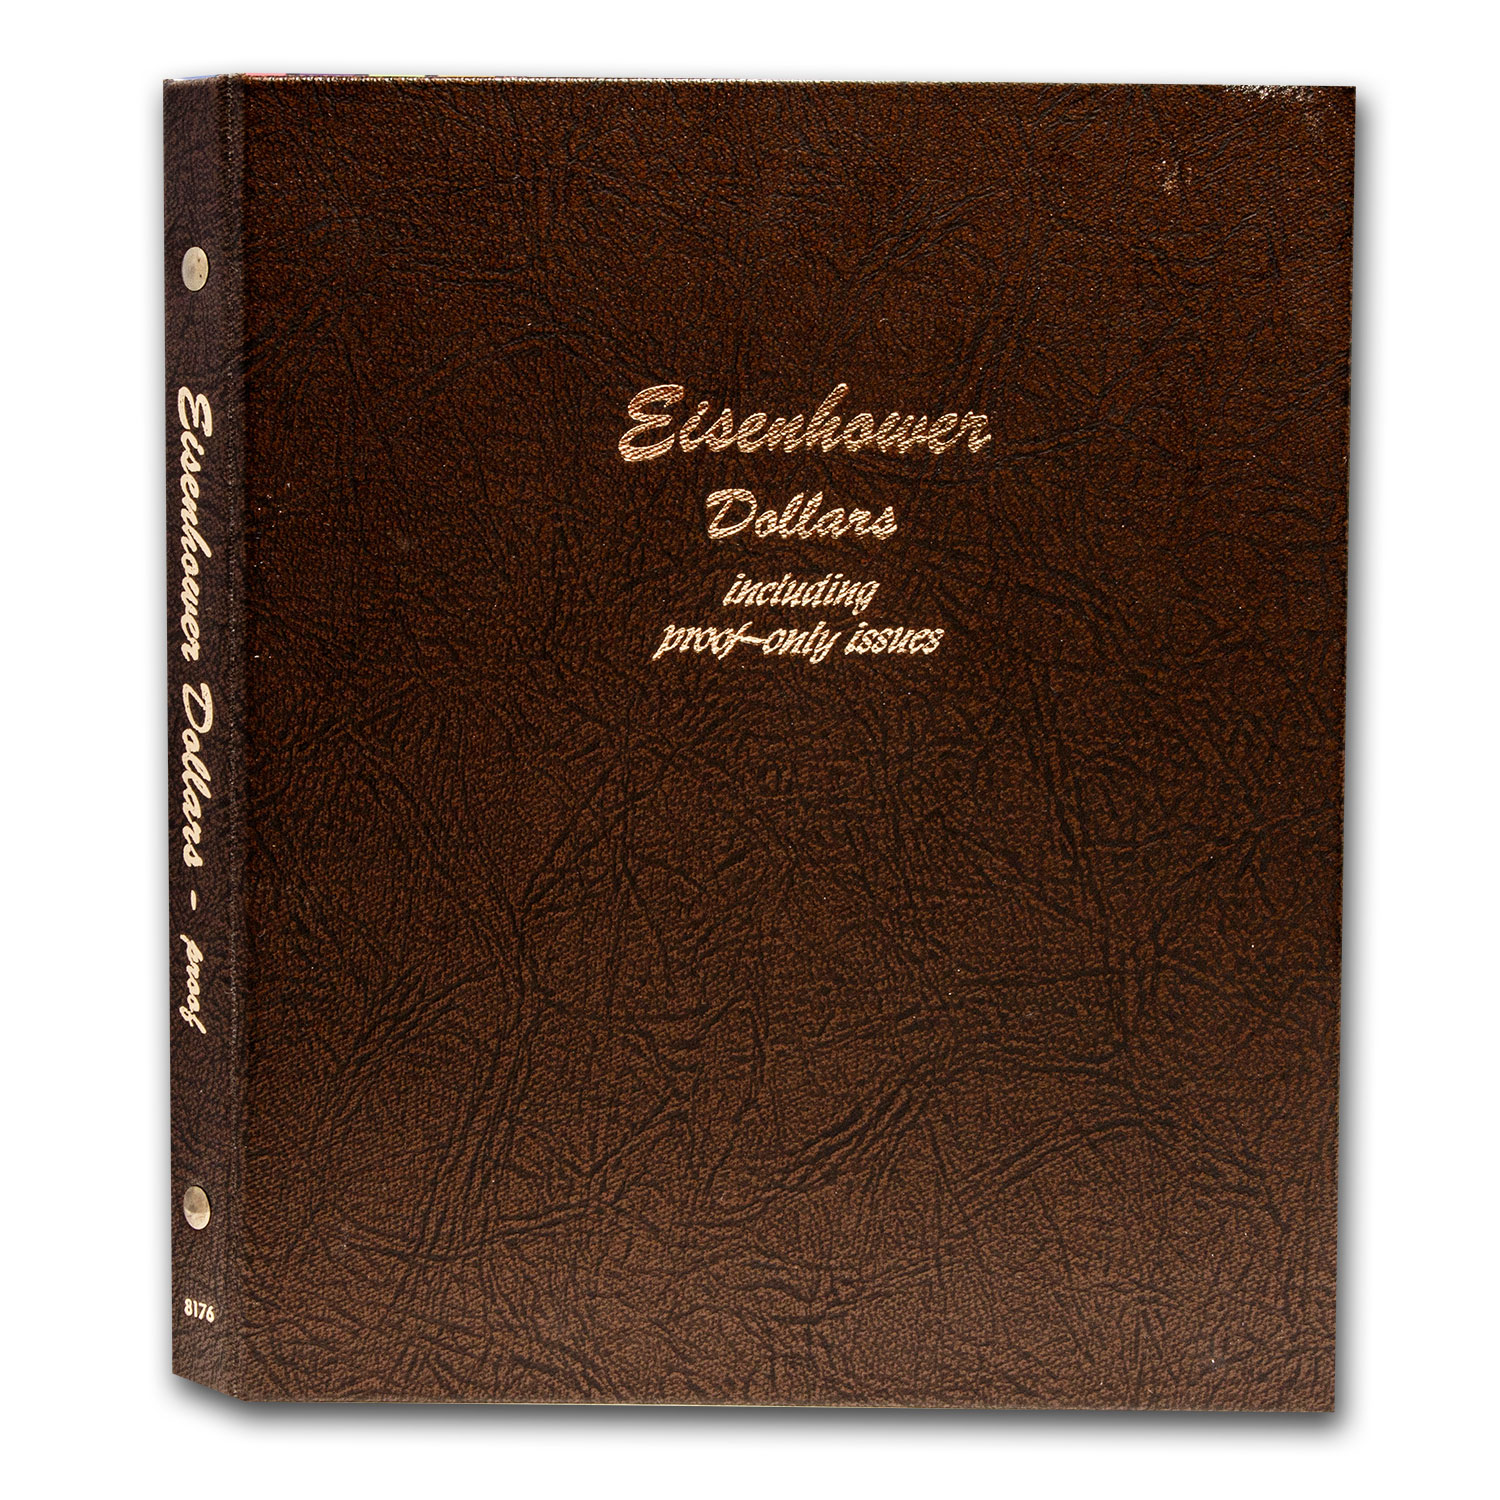 Dansco Coin Album # 7176 For Eisenhower Dollars From 1971-1978, Without Proofs 